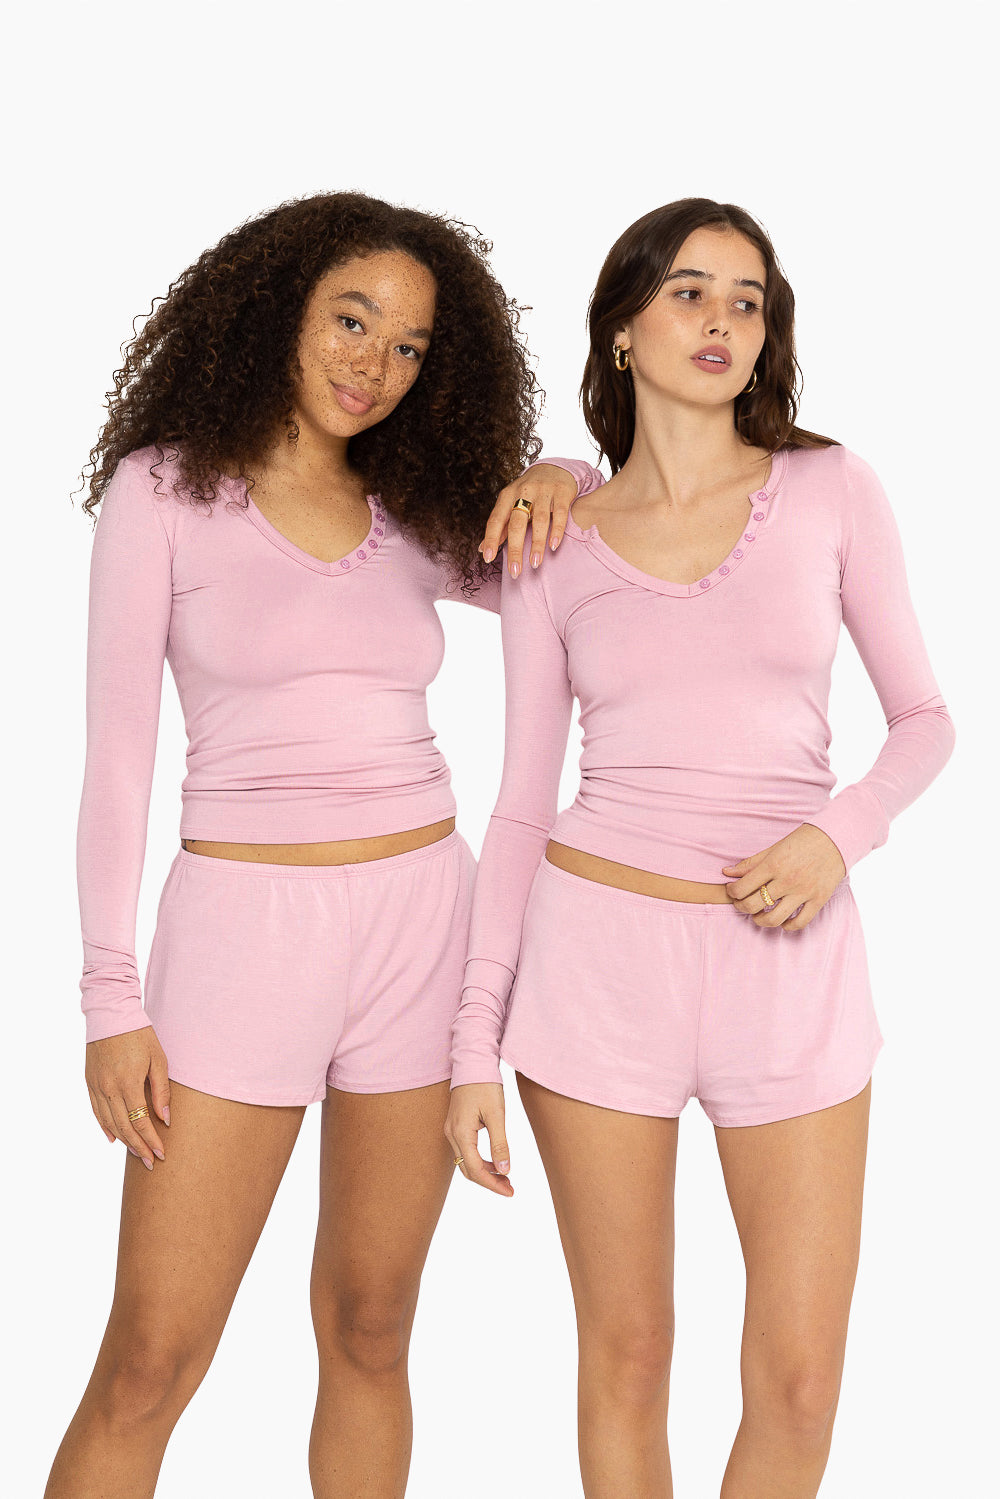 SET™ SLEEP JERSEY FITTED HENLEY IN PEONY